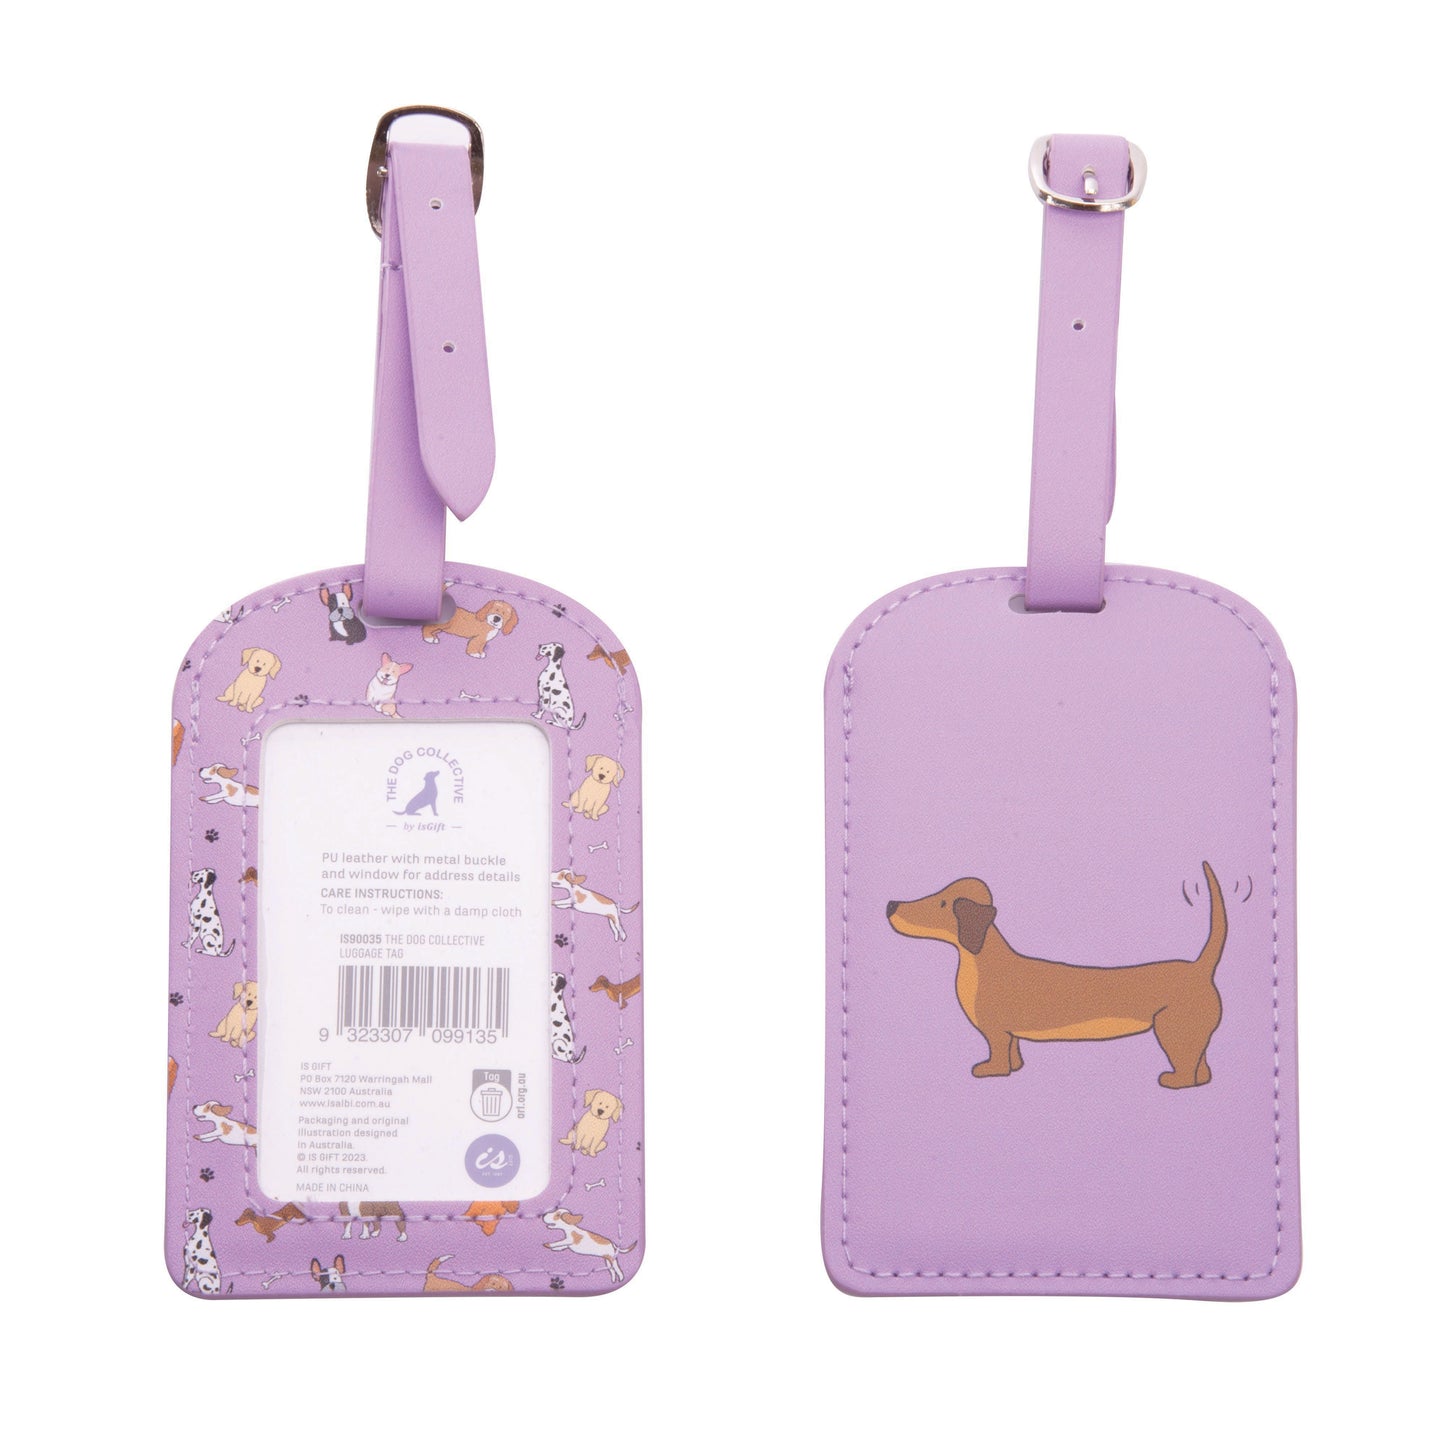 IS Luggage Tag - Dog Collective